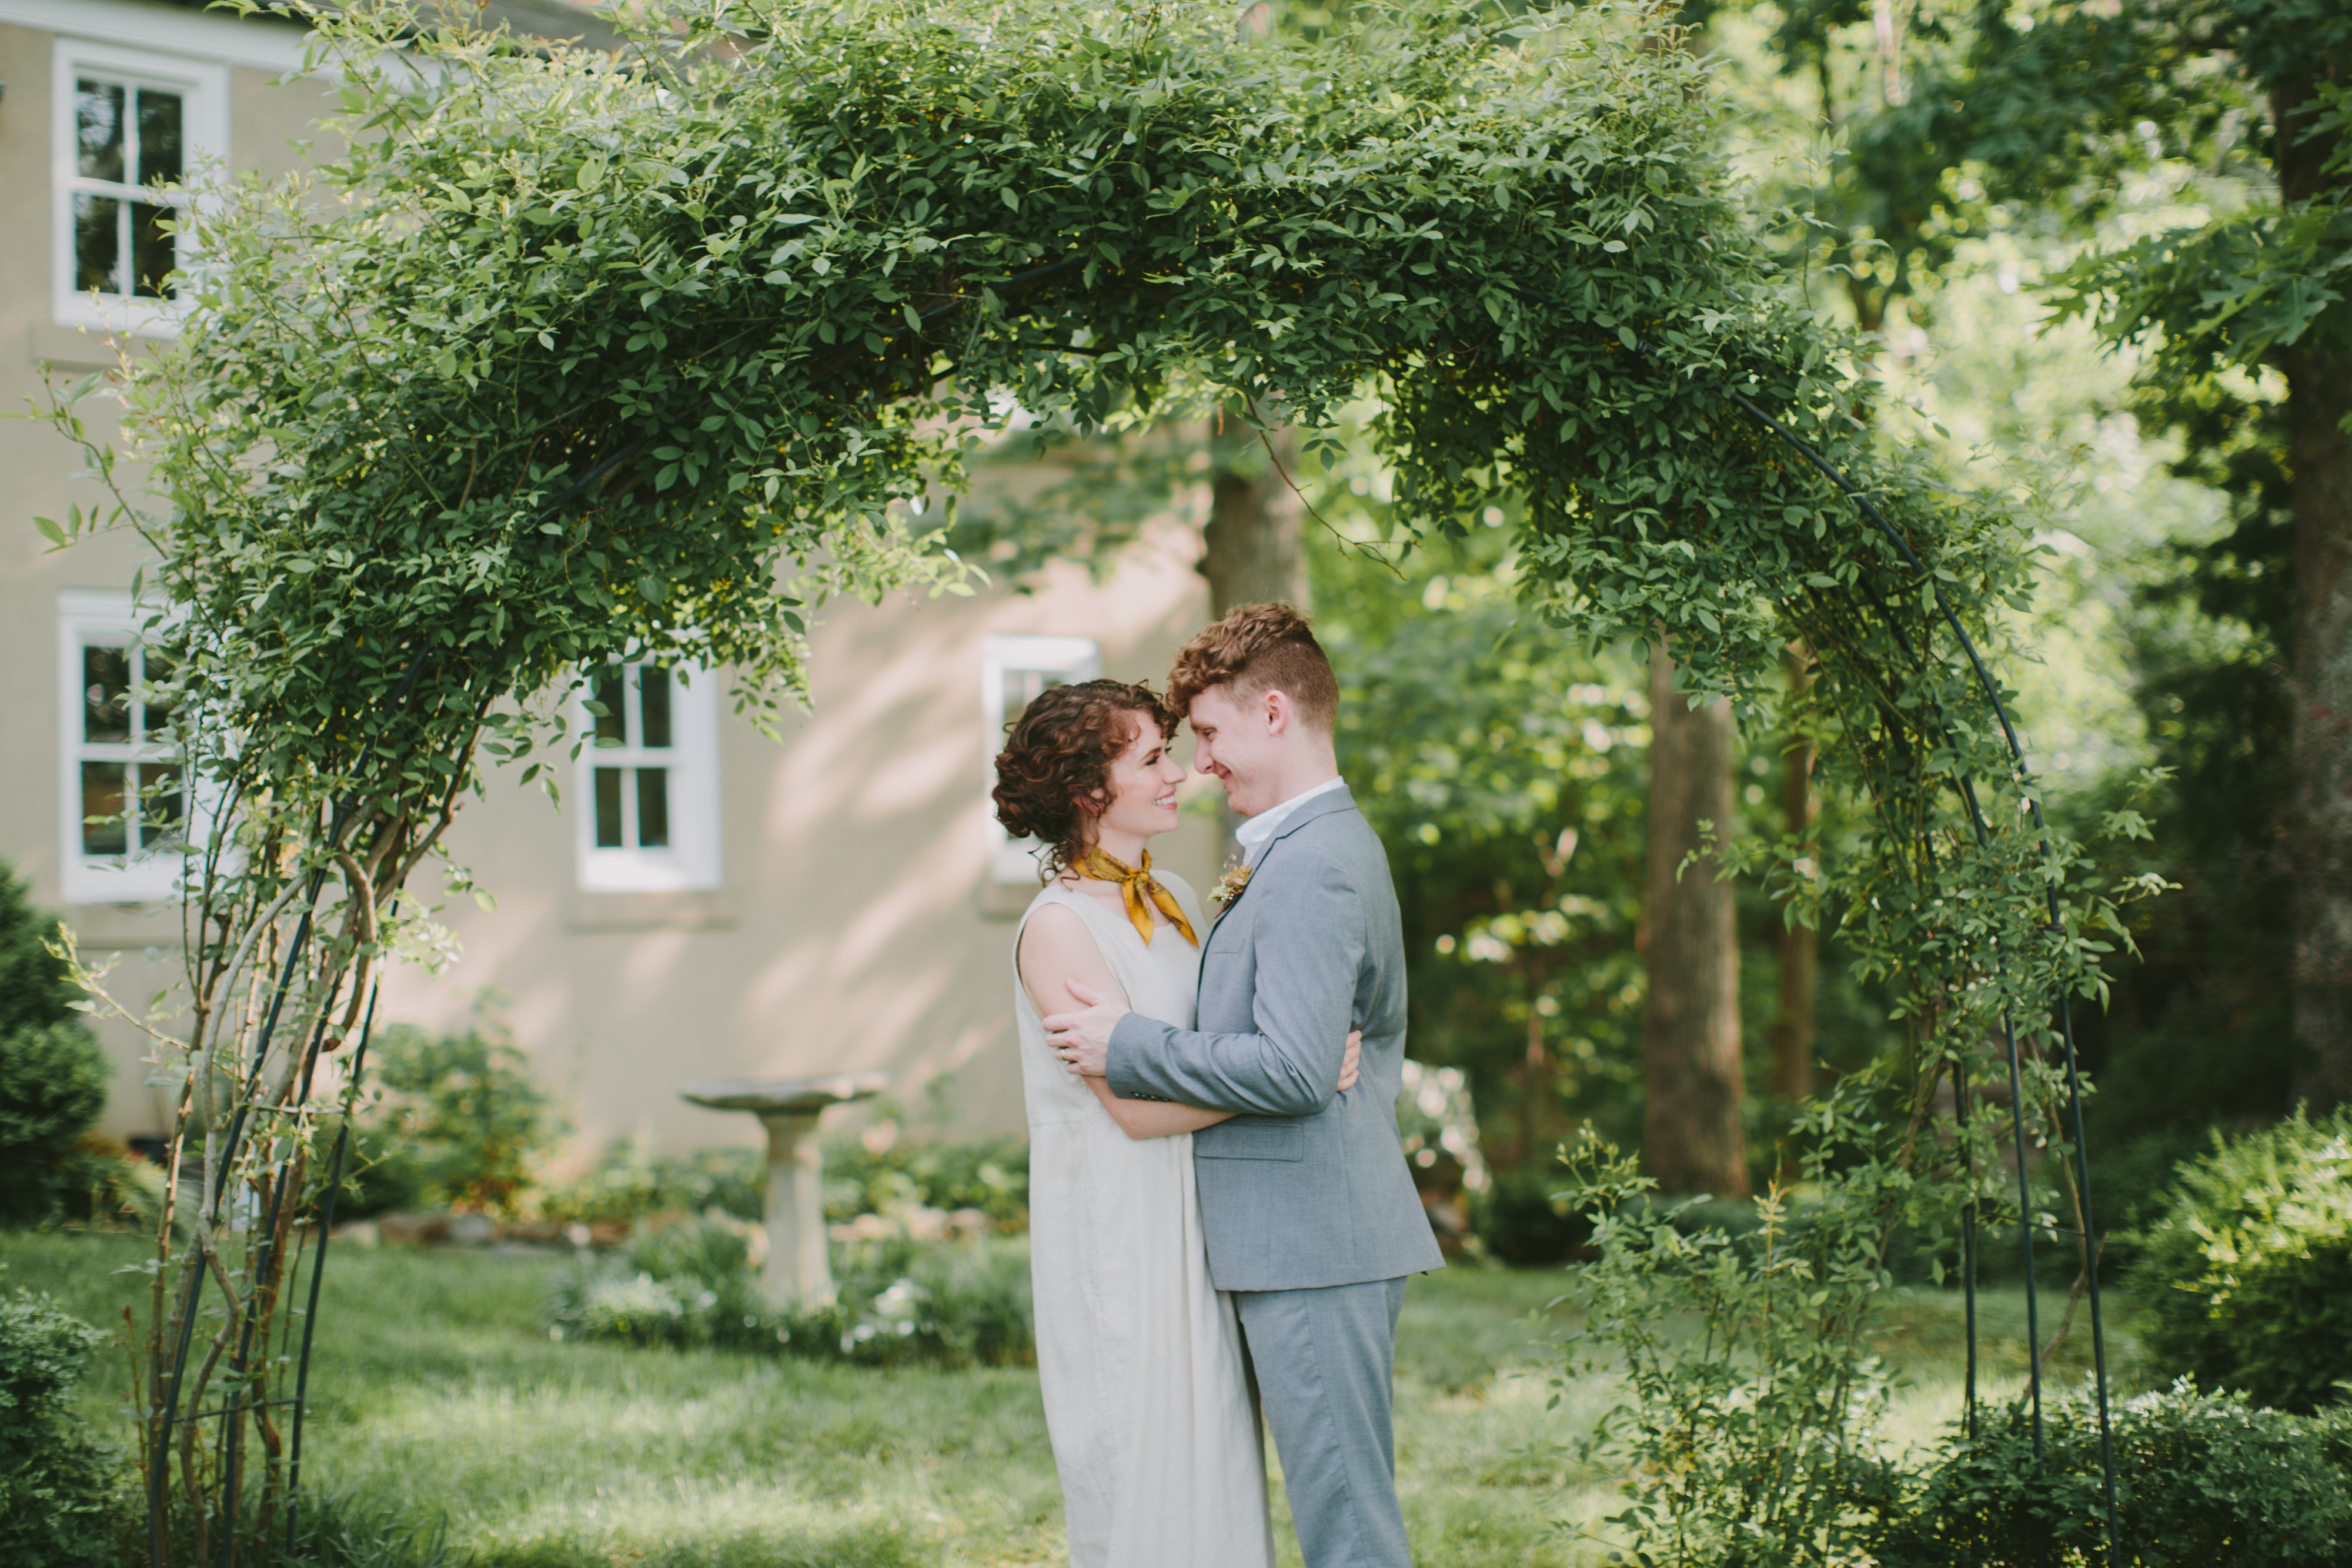 European-Style Countryside Elopement Inspiration